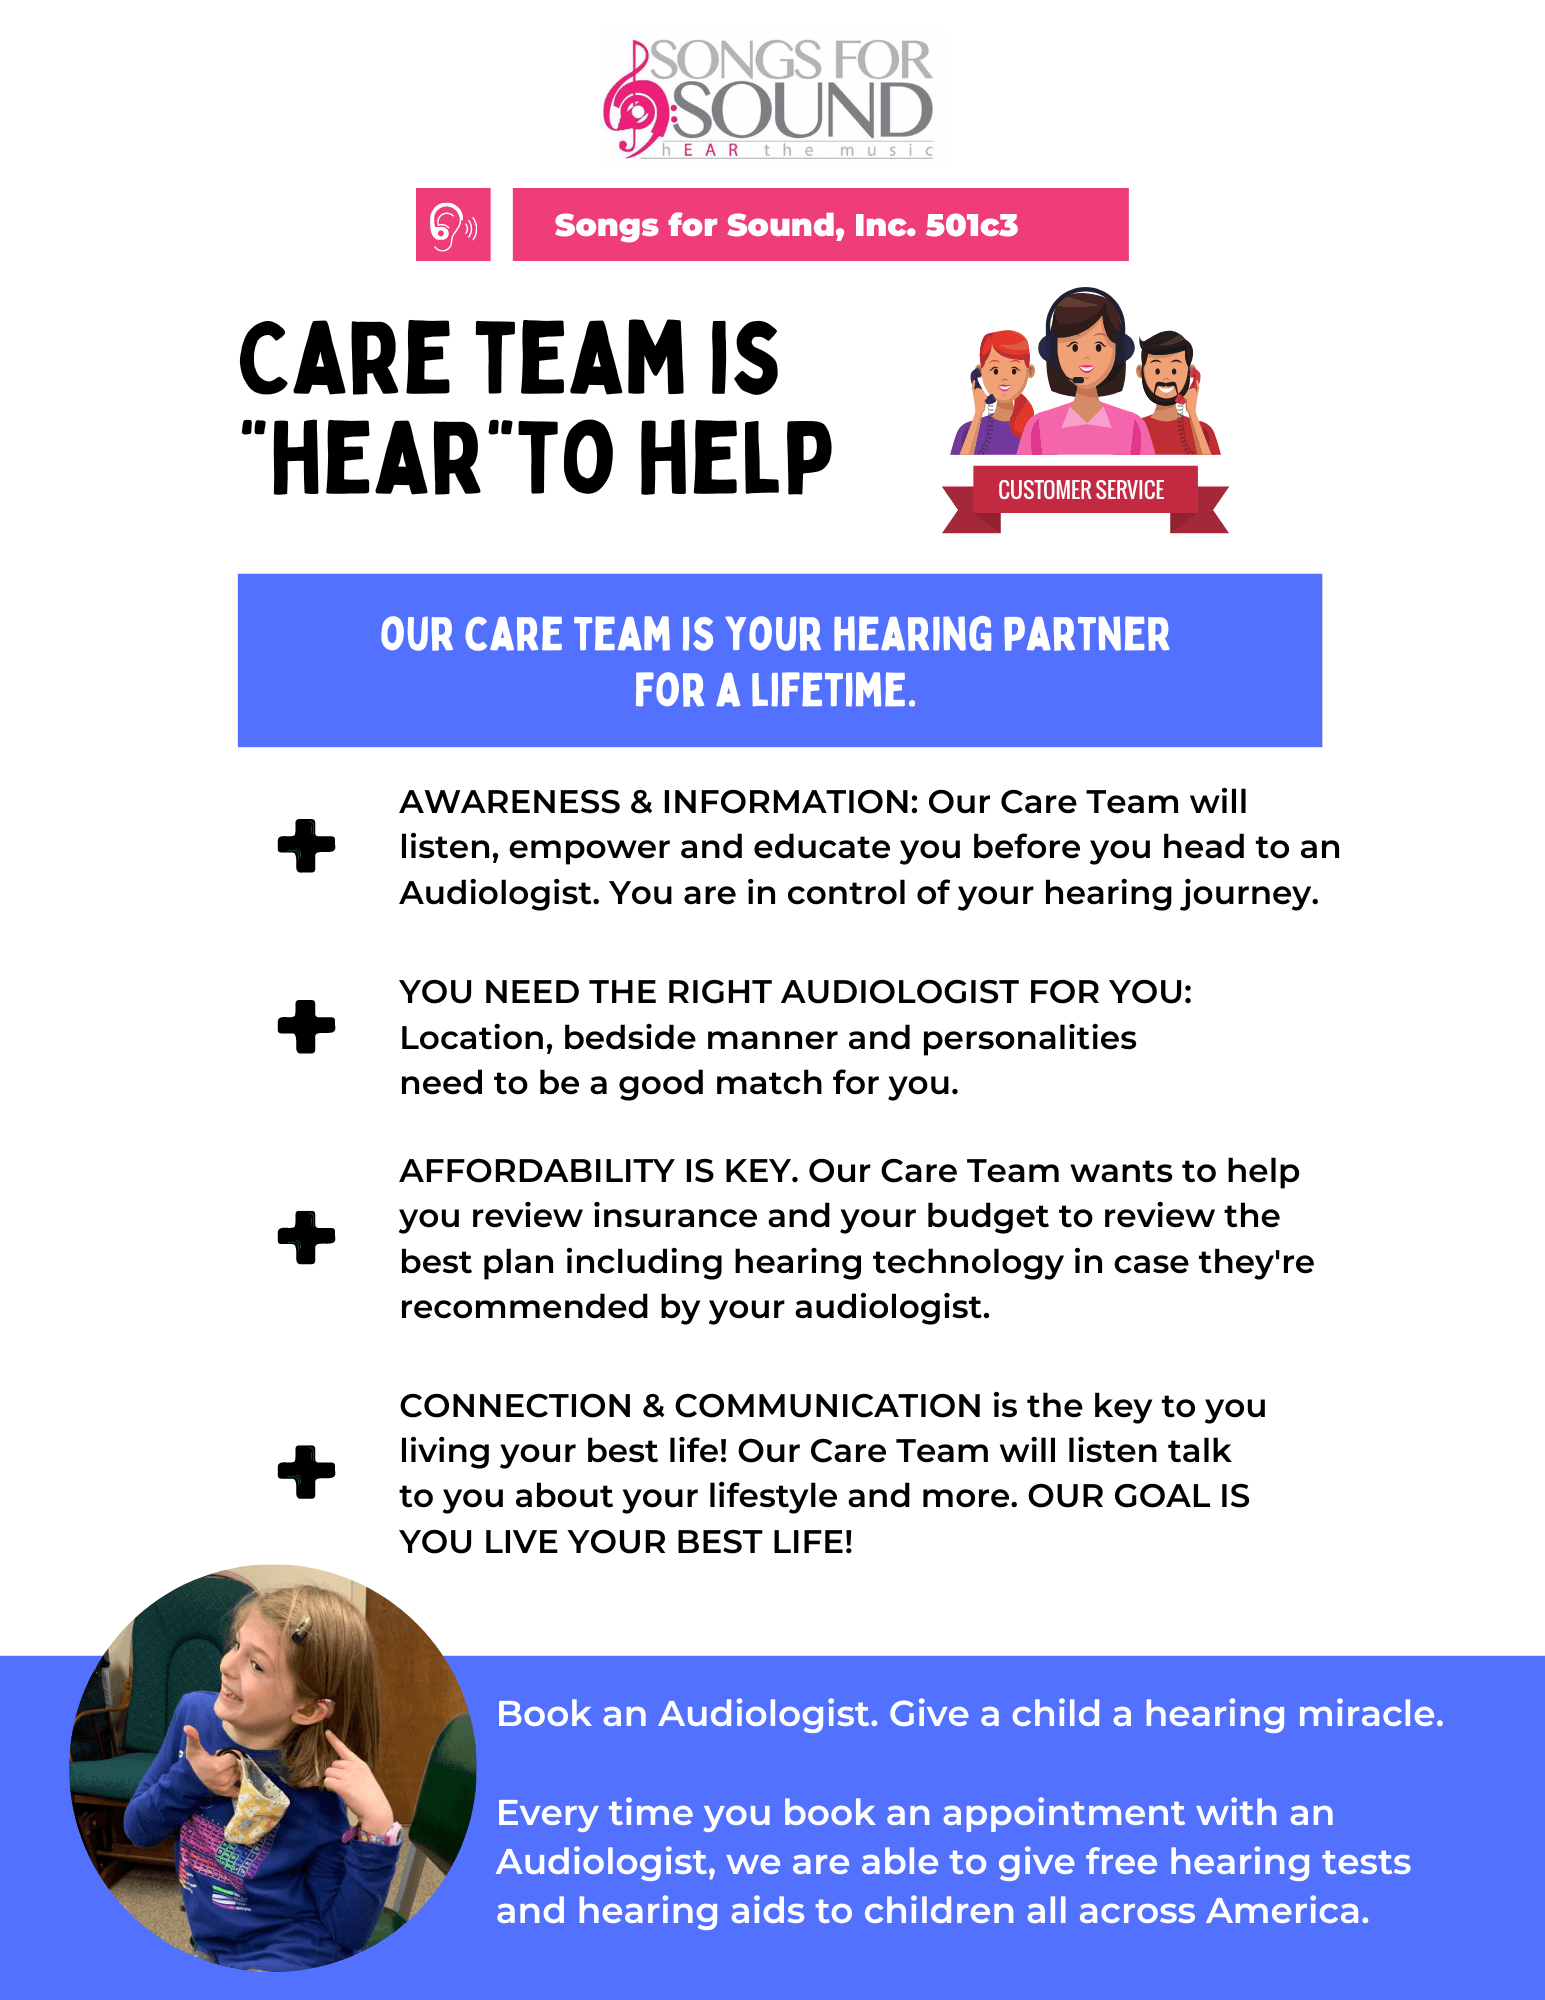 Care Team - Who are we, what do we do?